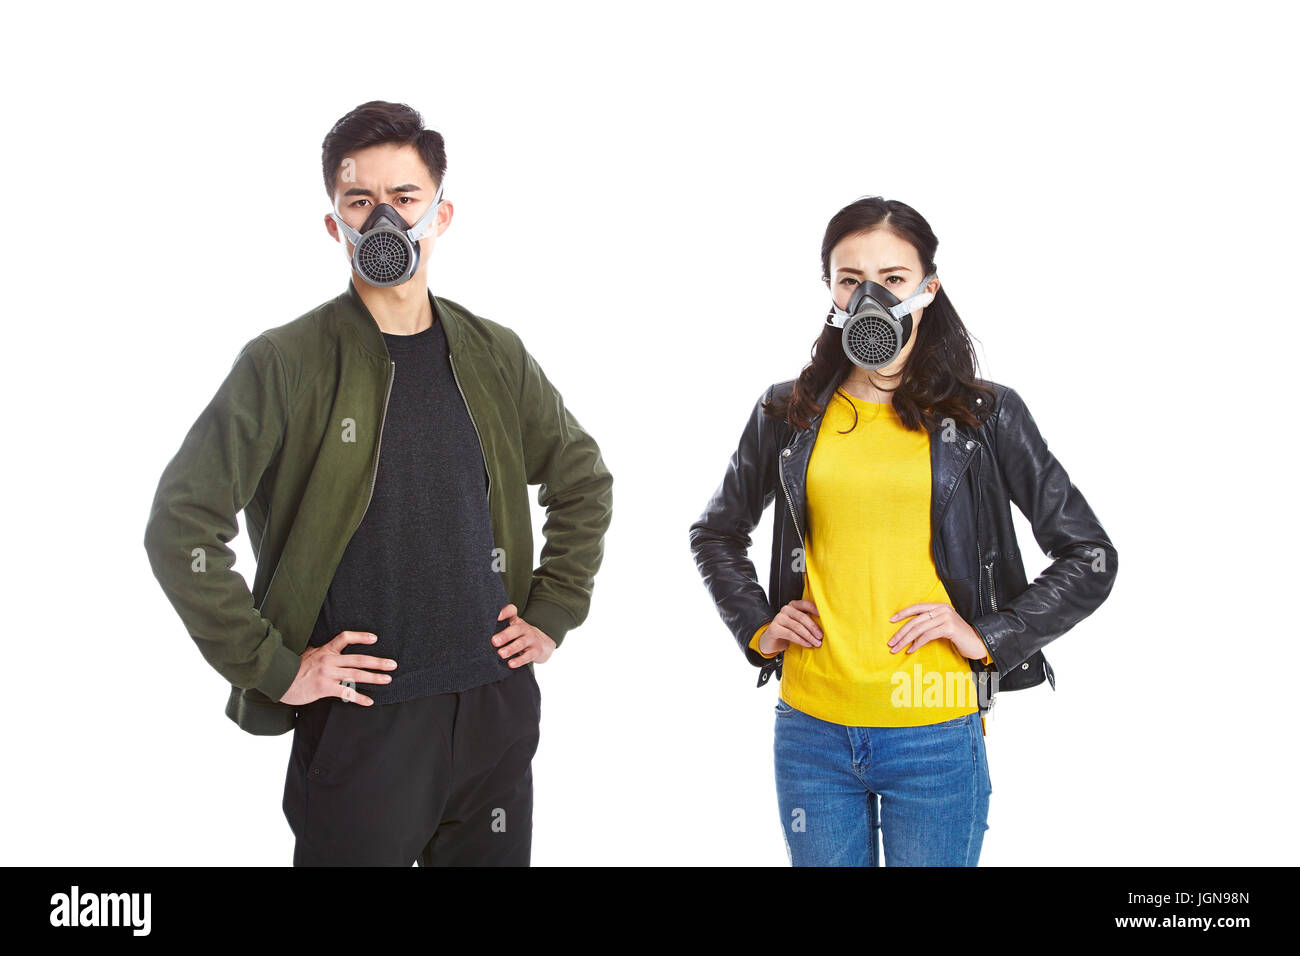 young asian man and woman wearing gas mask staring at camera with arms akimbo, isolated on white background. Stock Photo